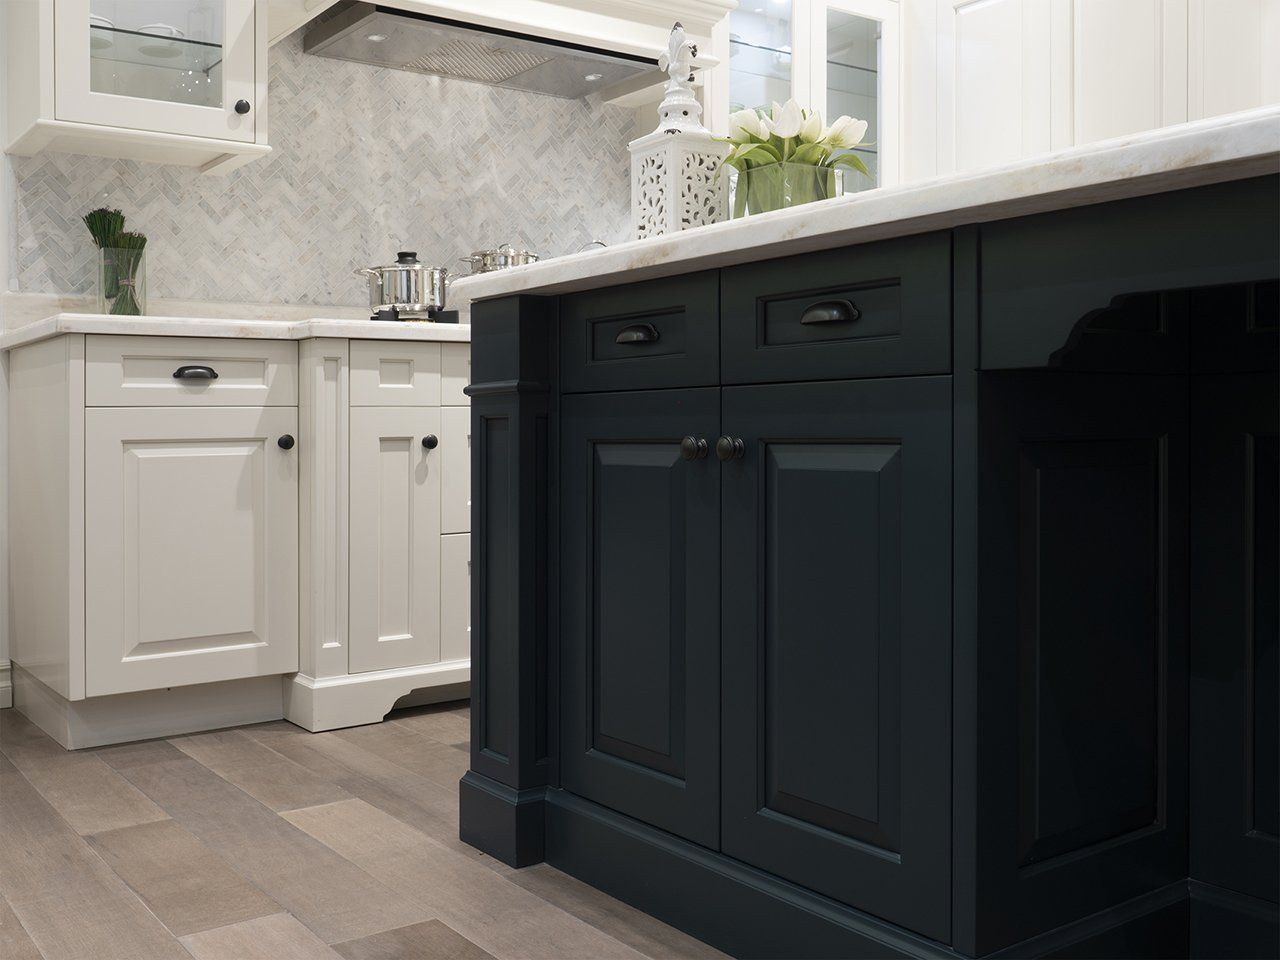 Black and white kitchen cabinets